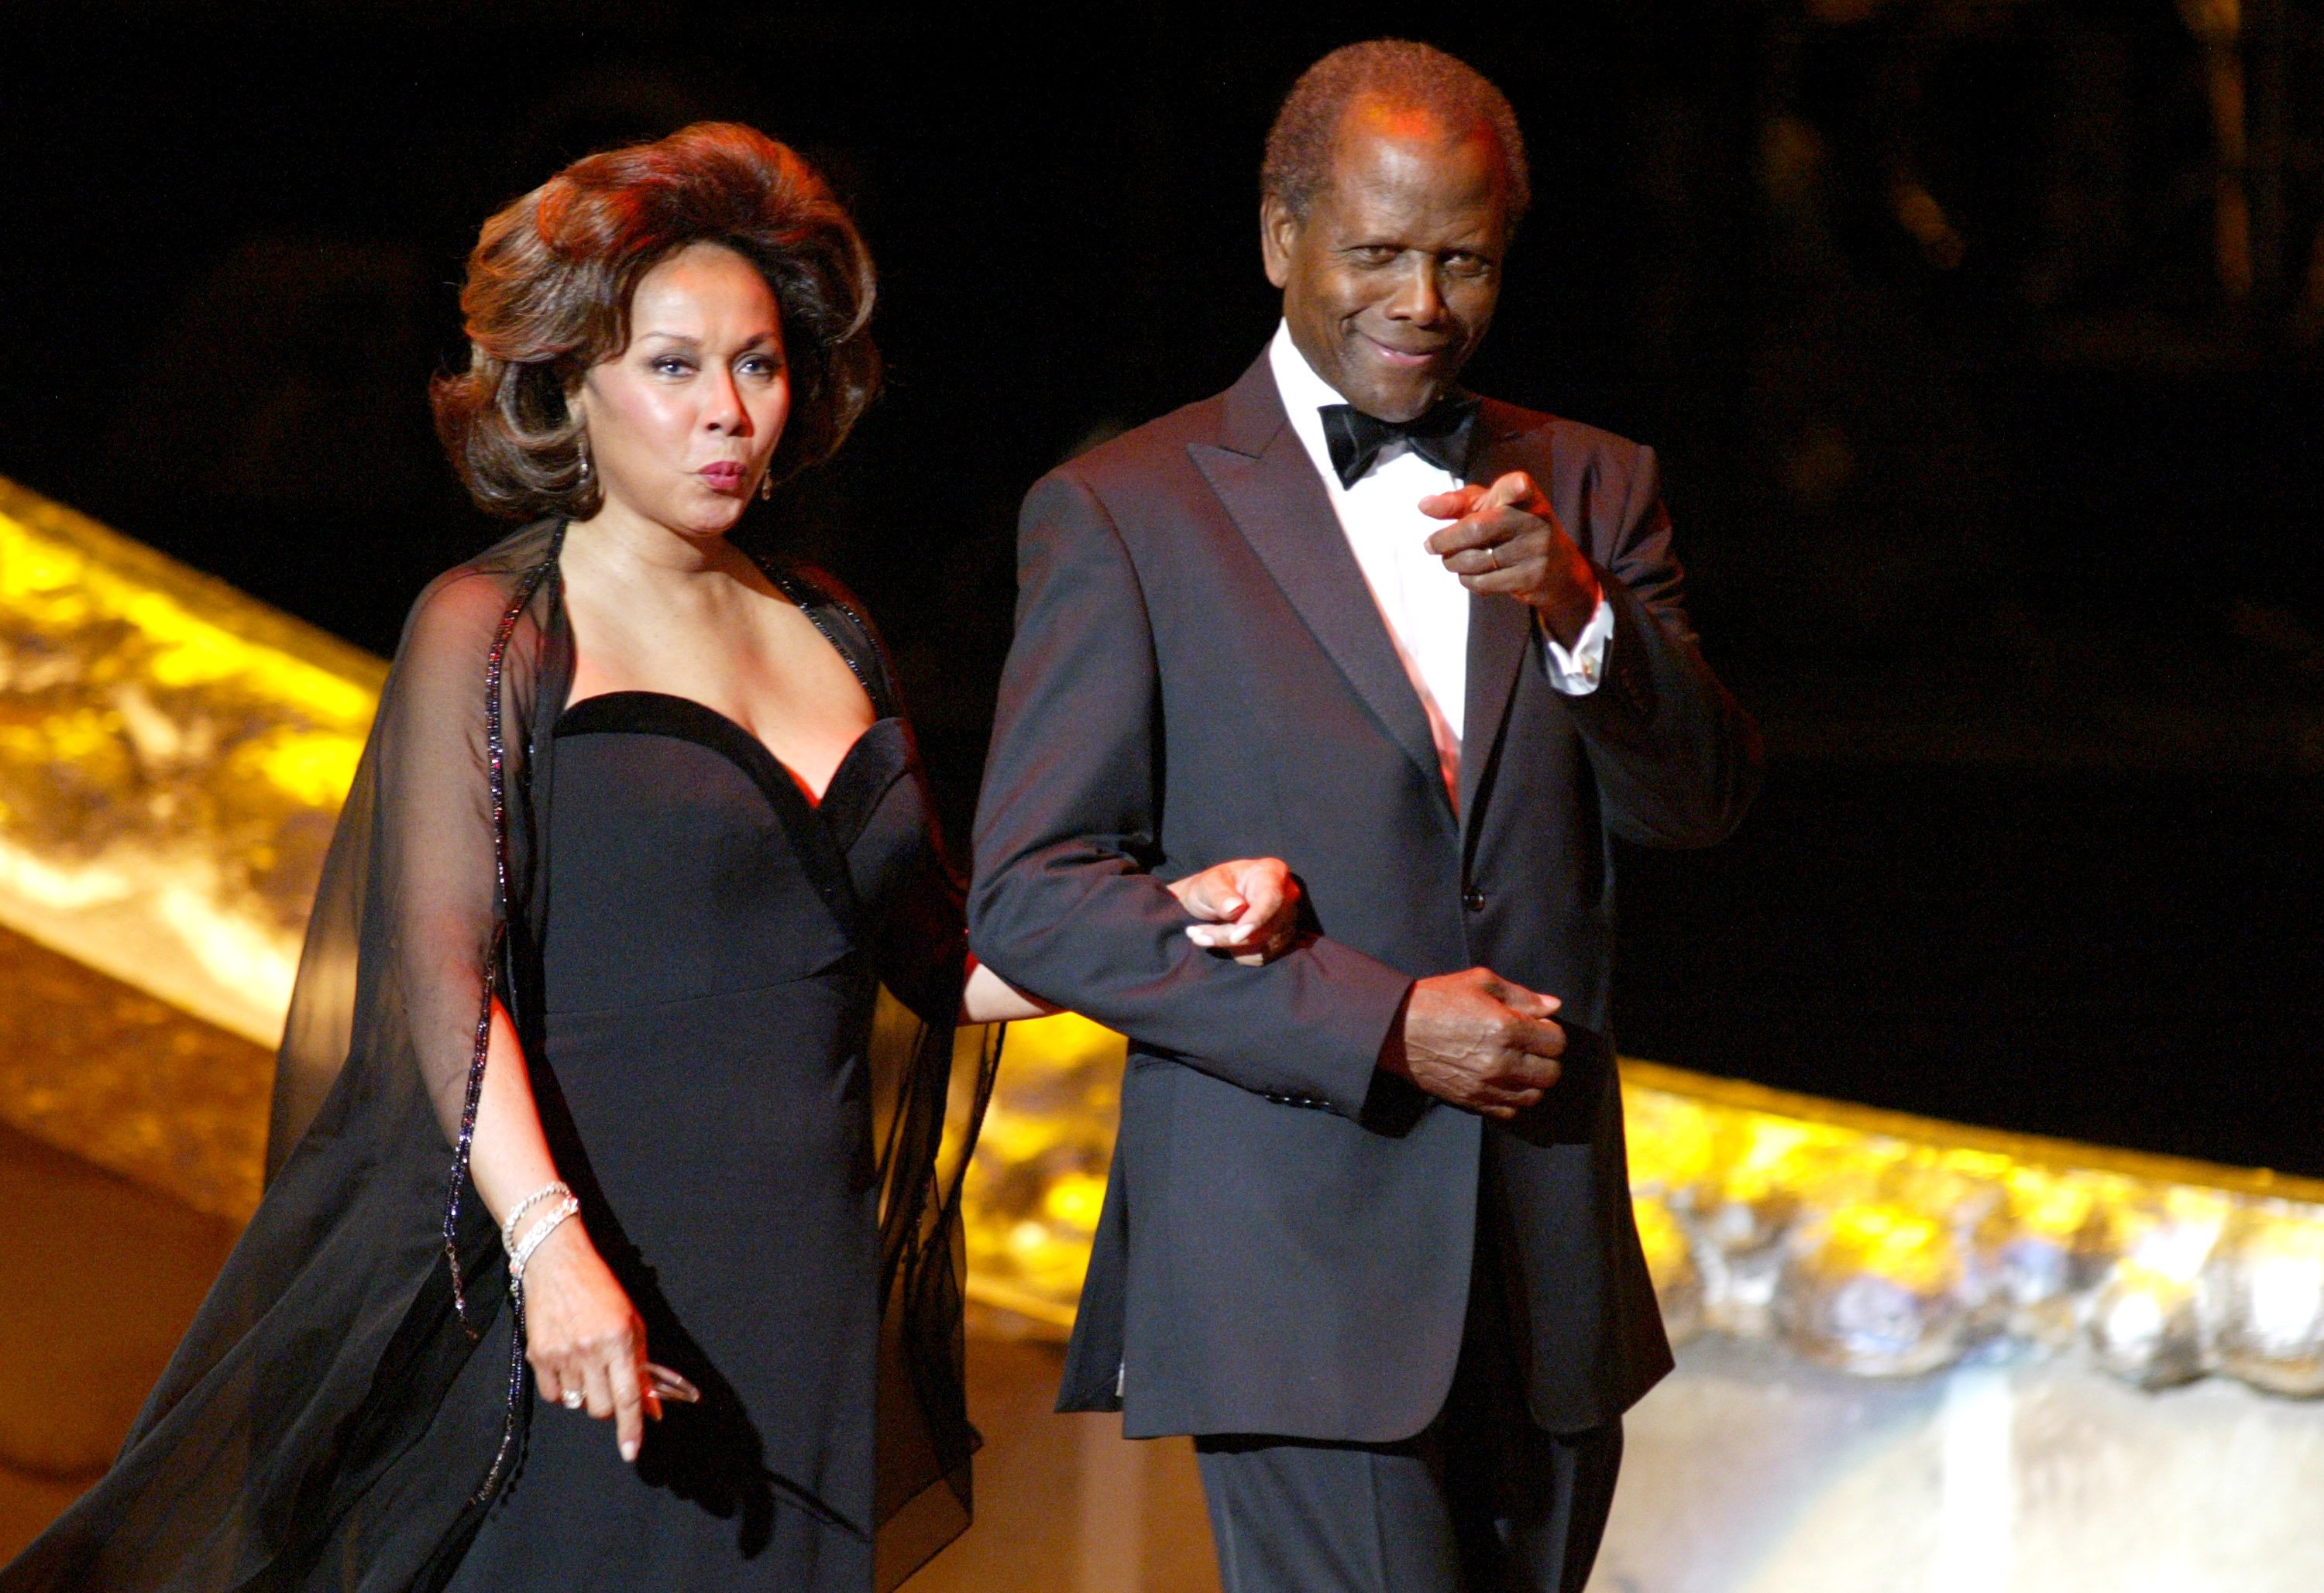 Diahann Carroll and Sidney Poitier at the 36th Annual NAACP Image Awards on March 19, 2005.  Photo: Getty Images